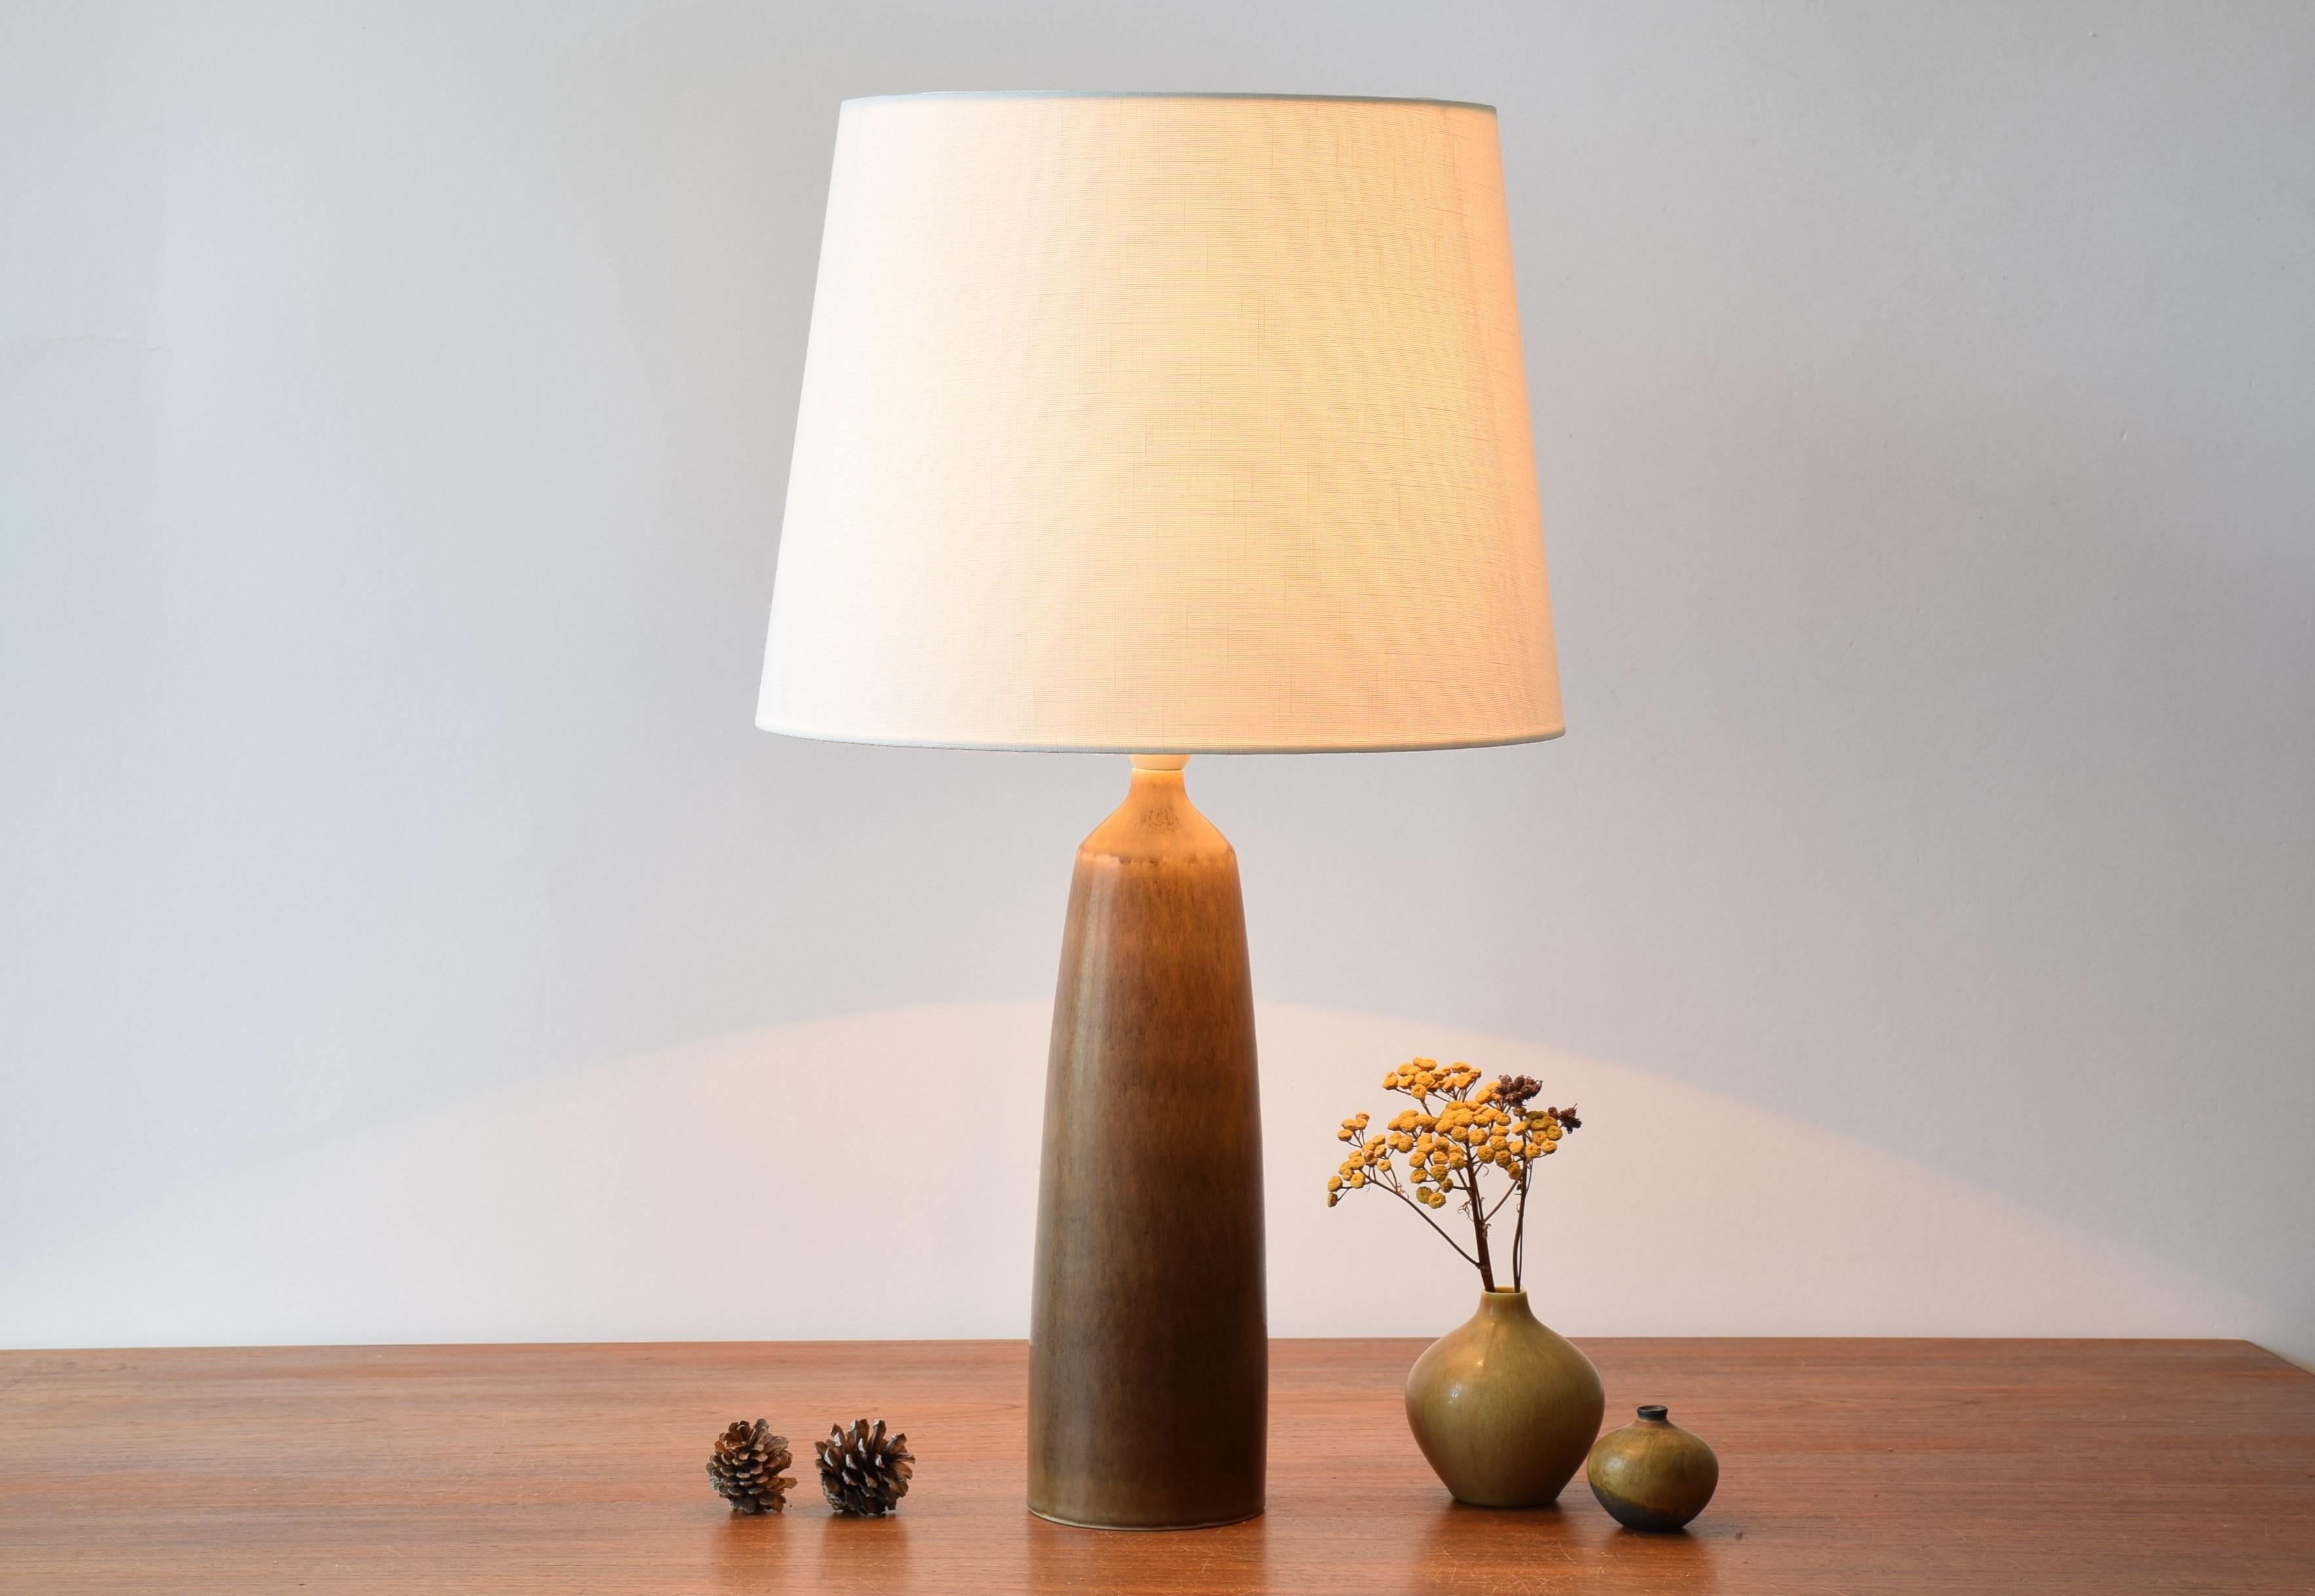 Midcentury tall table lamp from Danish Palshus with brown haresfur glaze.
The lamp was designed by Per Linnemann-Schmidt and produced, circa 1950s.

Included is a new lampshade designed in Denmark. It is made of woven fabric with some texture and